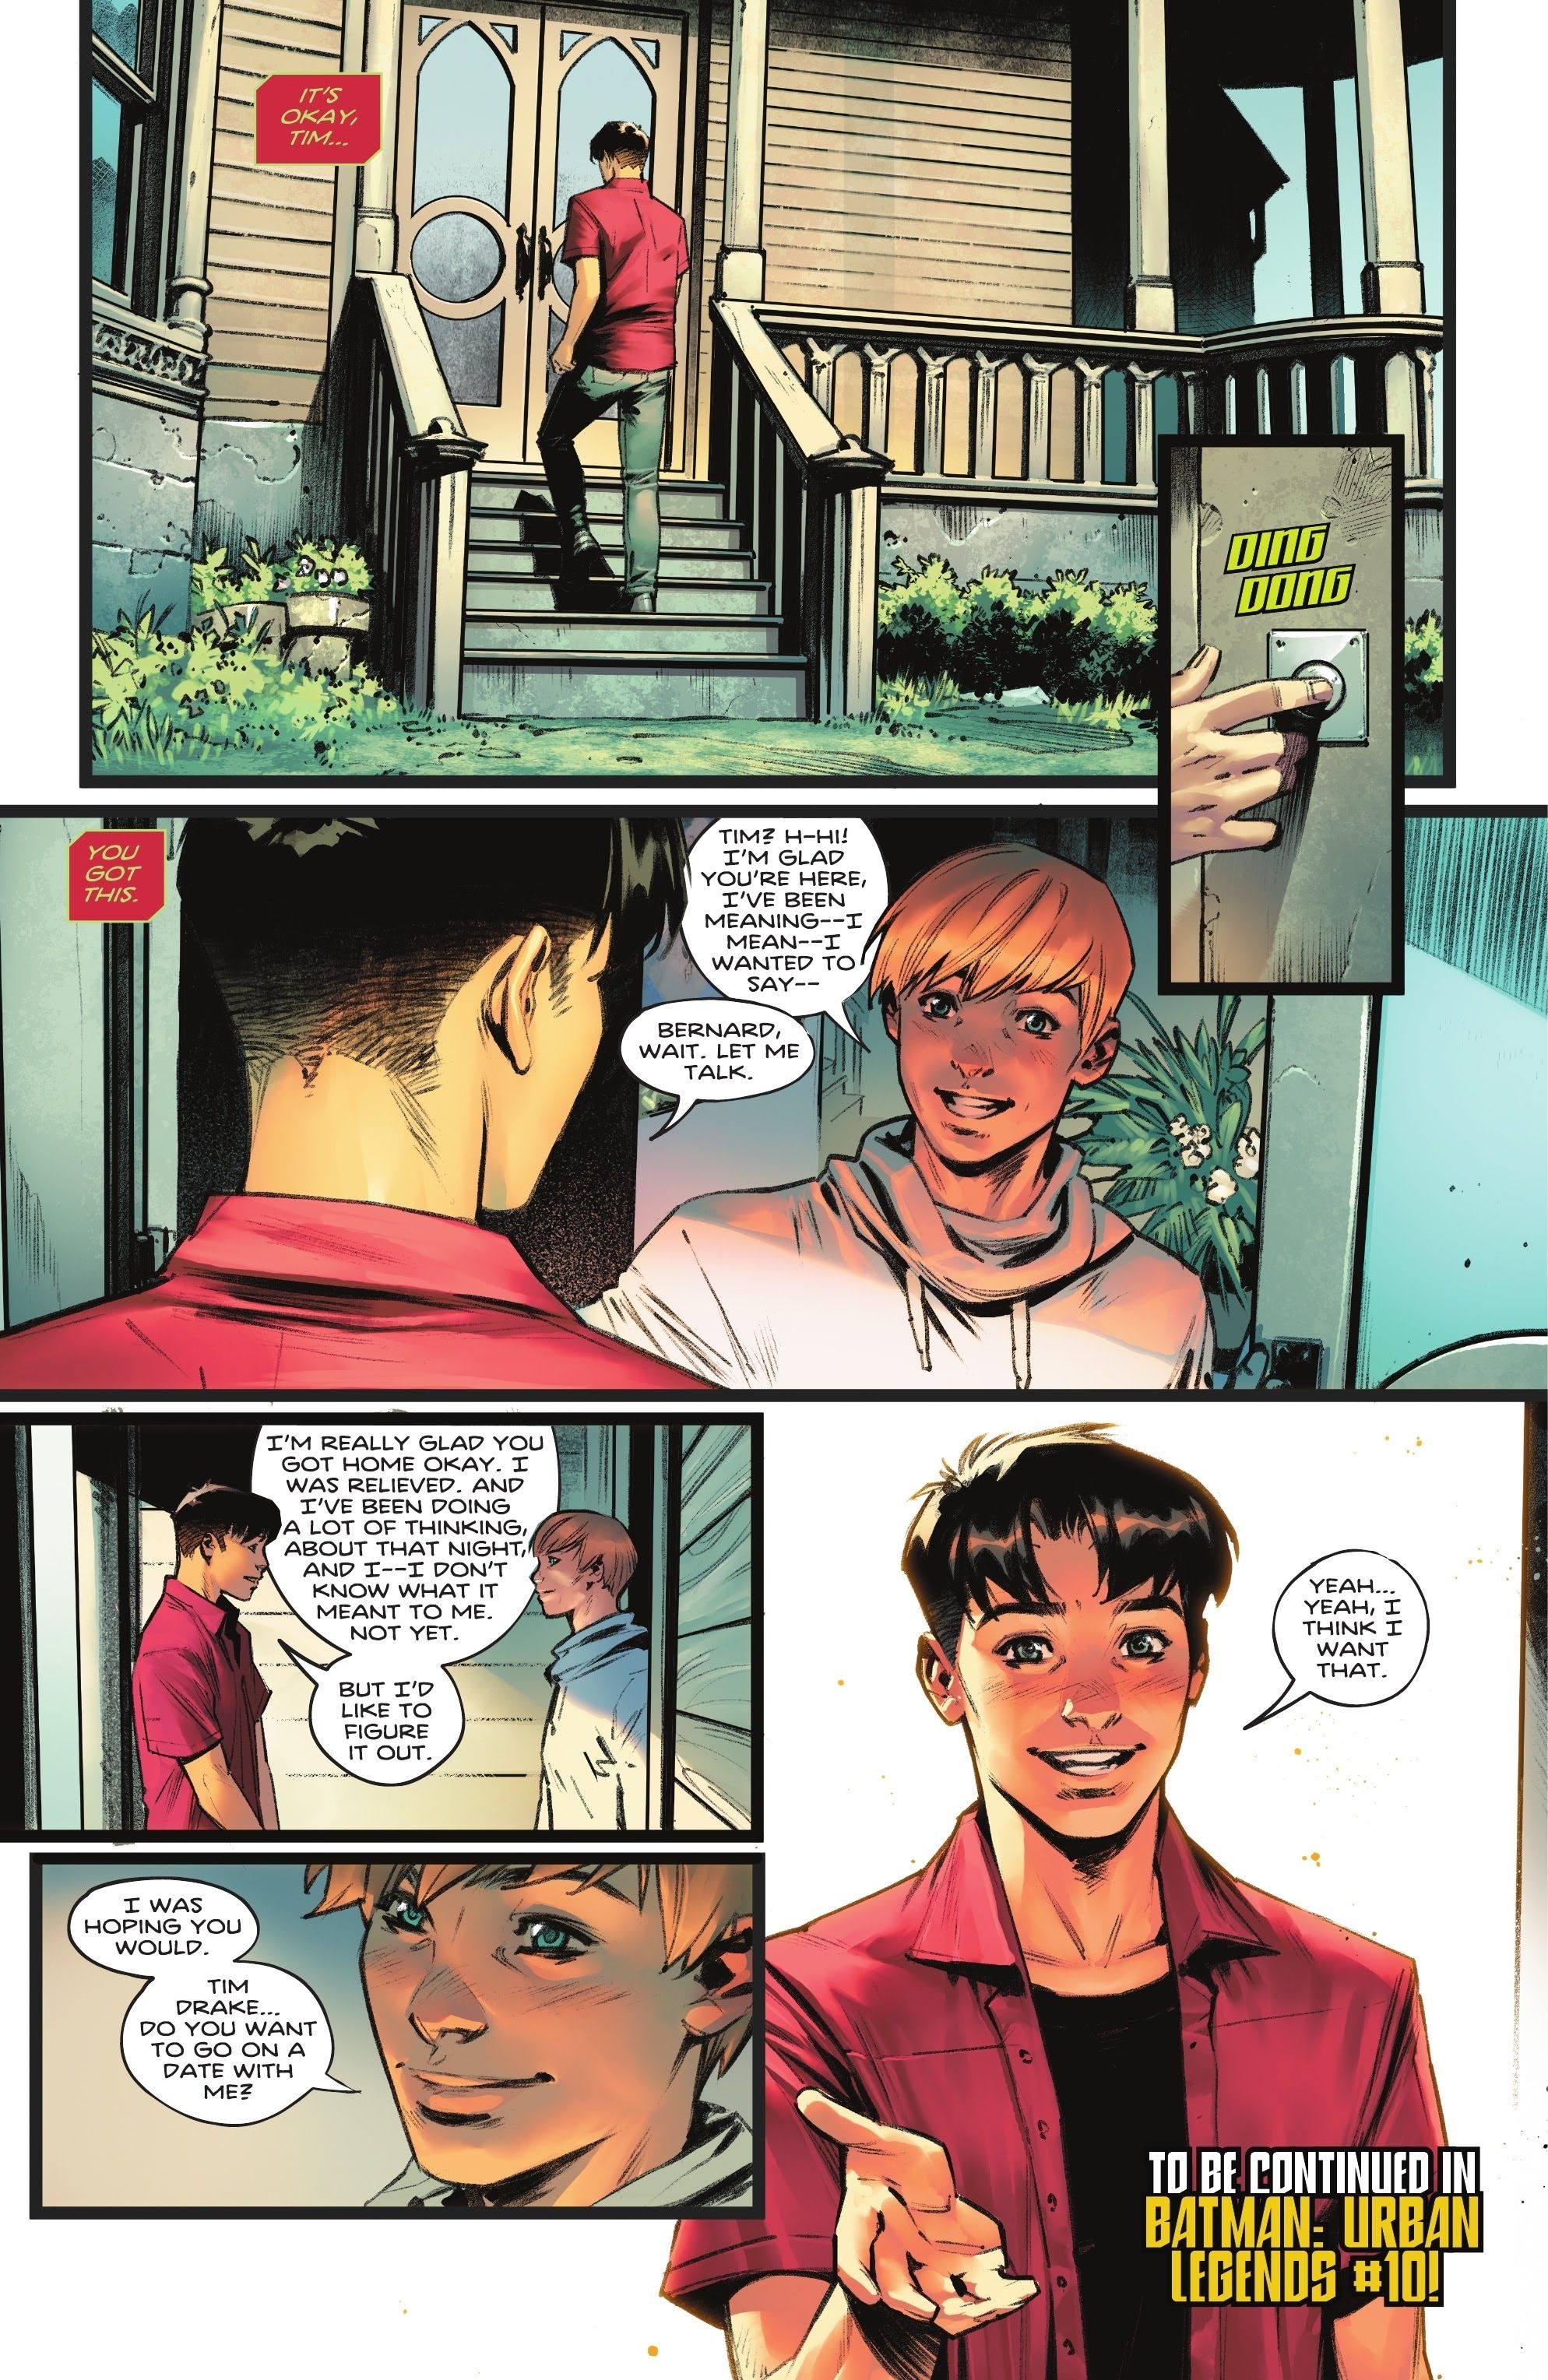 Tim Drake asks his friend out on a date